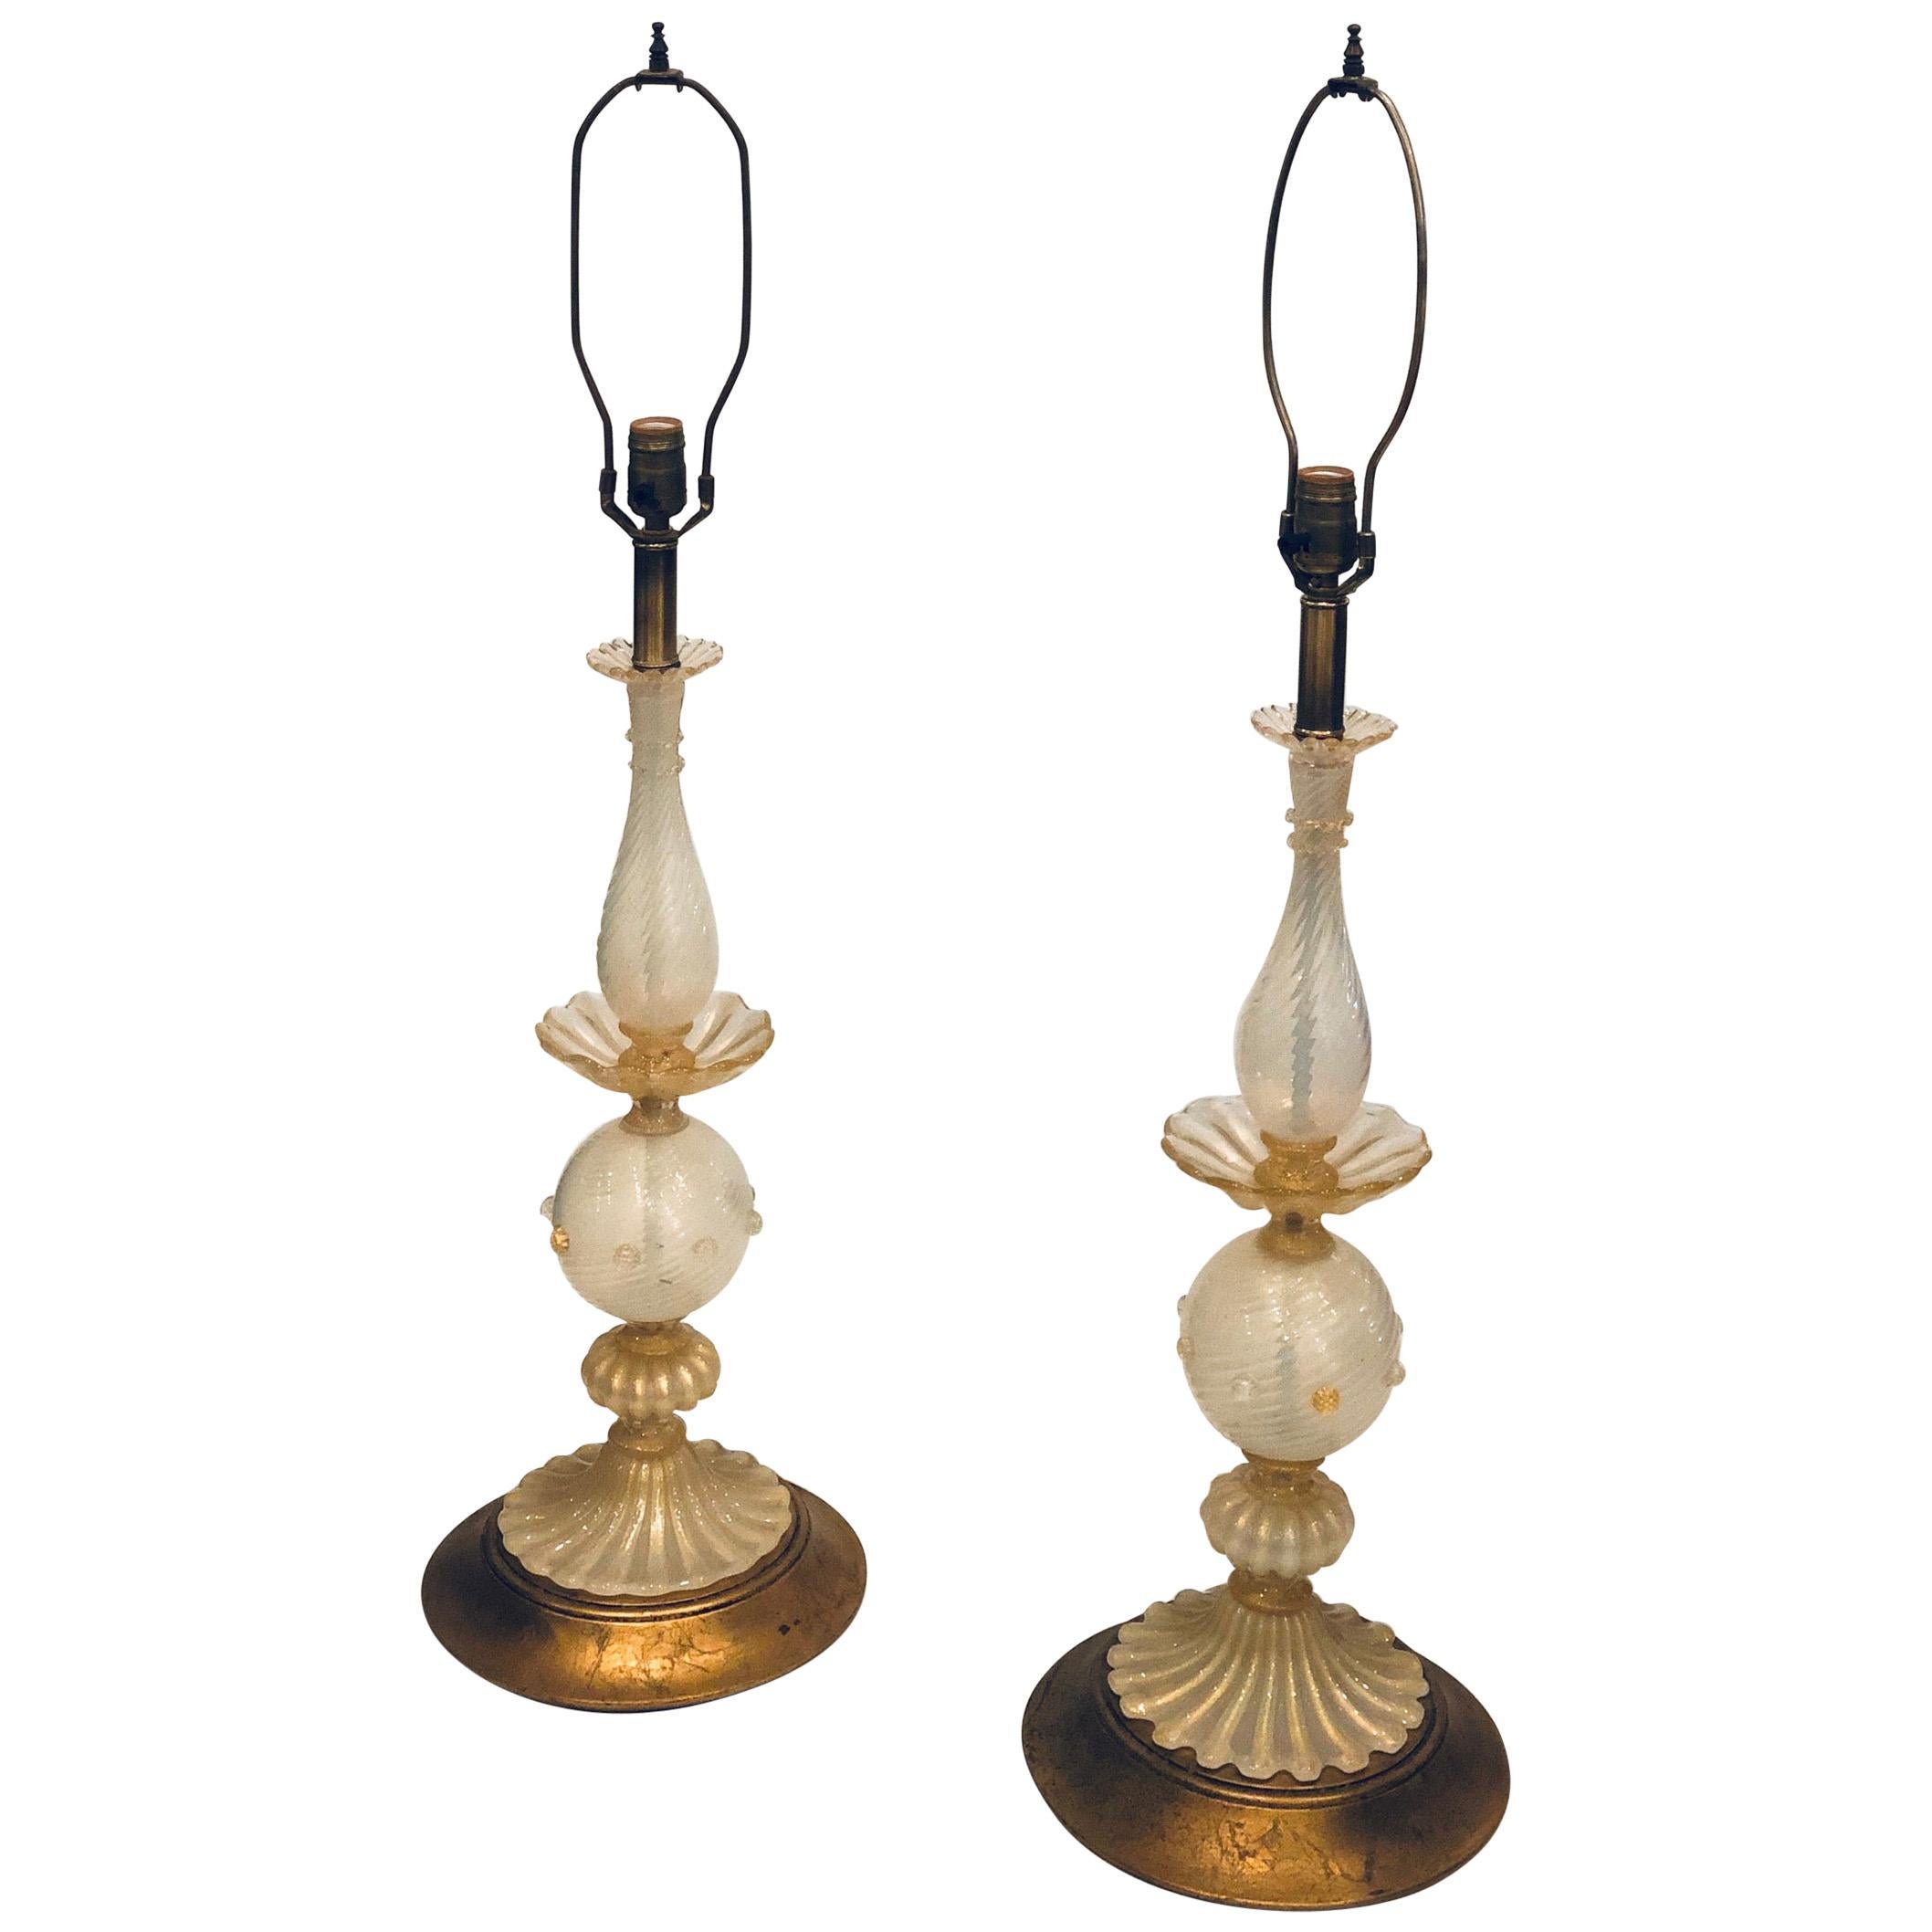 Hollywood Regency Pair of Tall Murano Lamps with Gold Leaf Bases